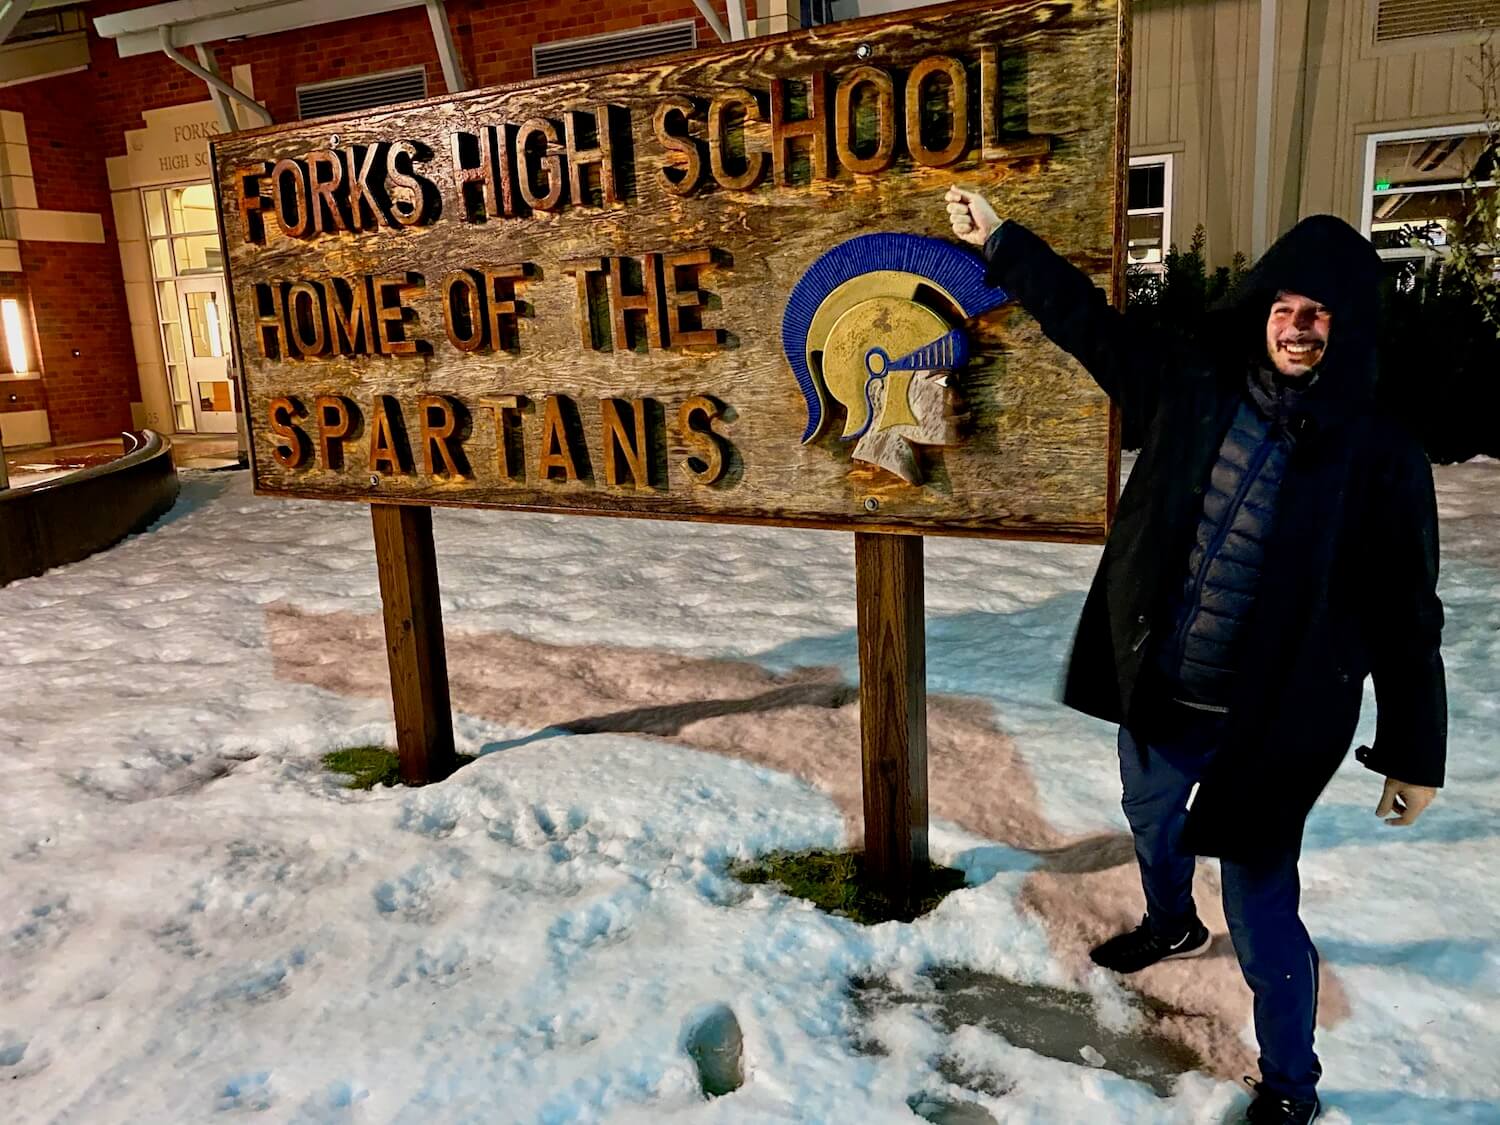 A man stands in front of a sign that reads "Forks High School, home of the Spartans". There is snow on the ground and the school building in the background.